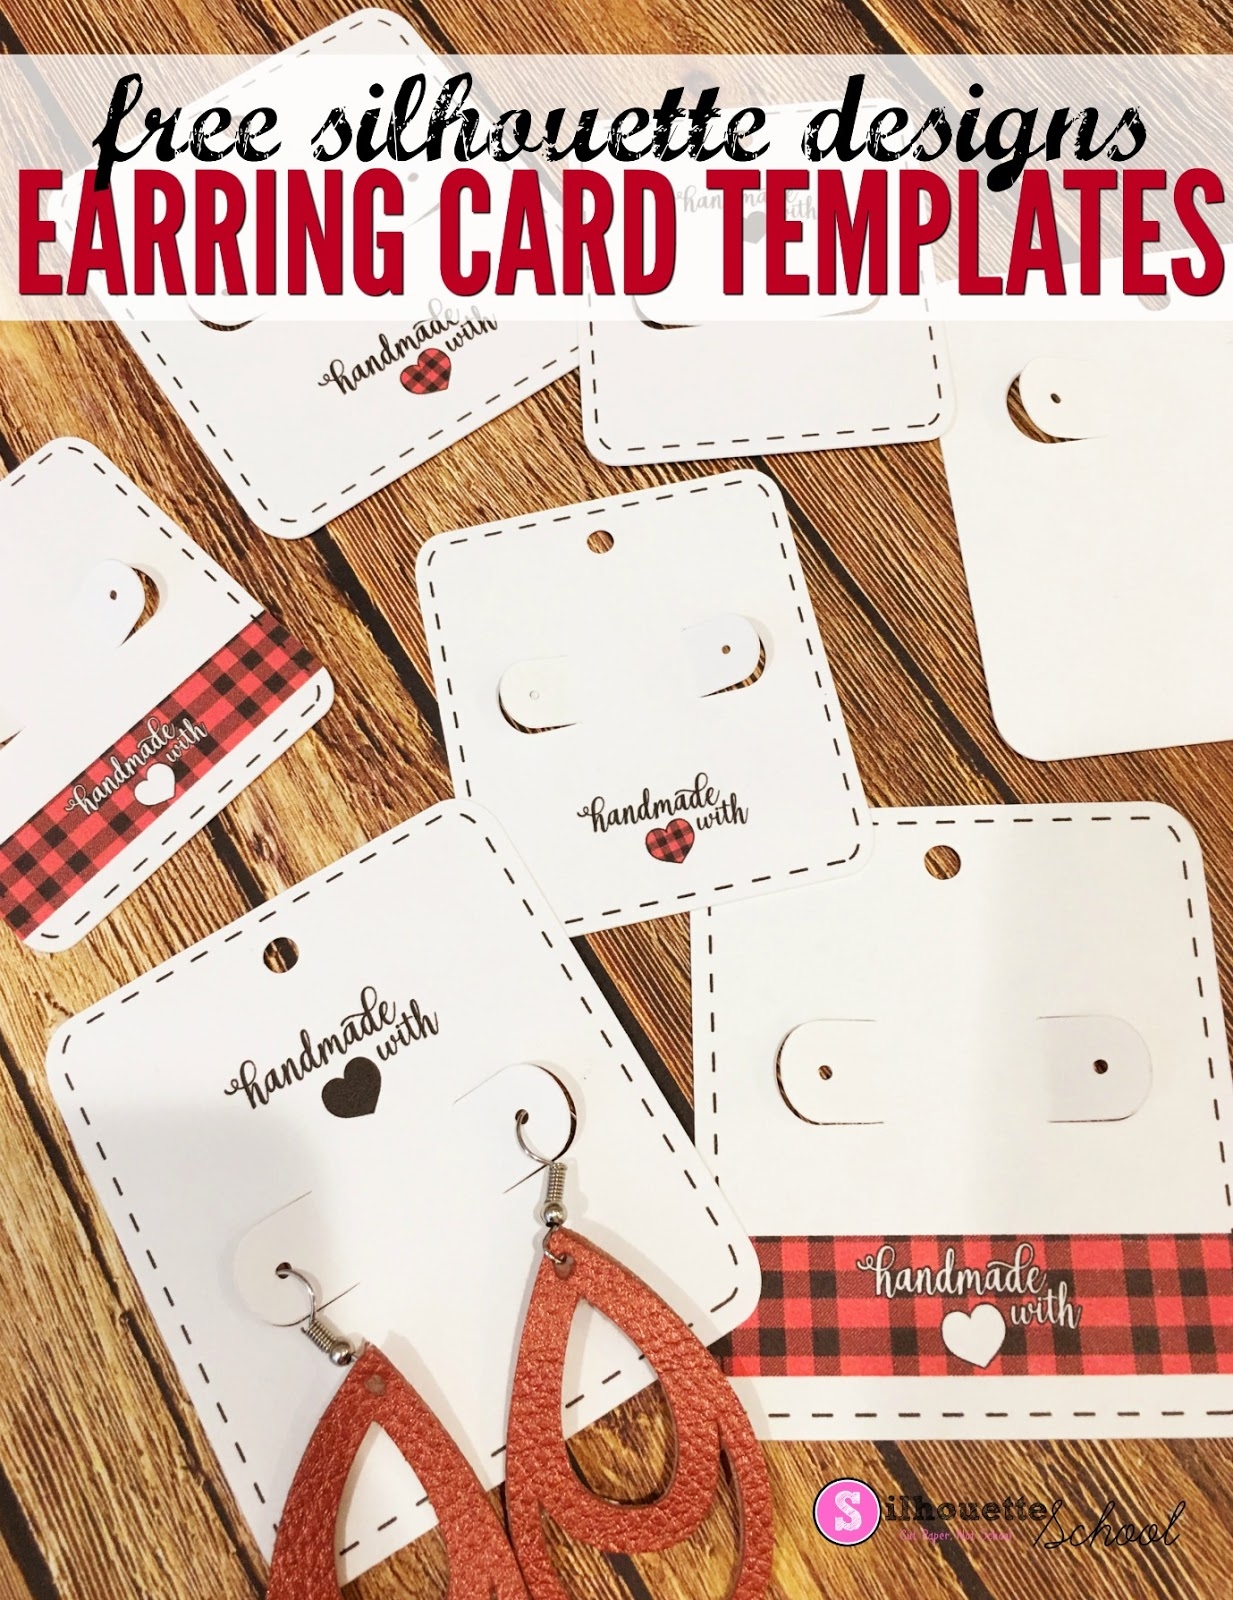 Free Silhouette Earring Card Templates Set Of 8 Silhouette School